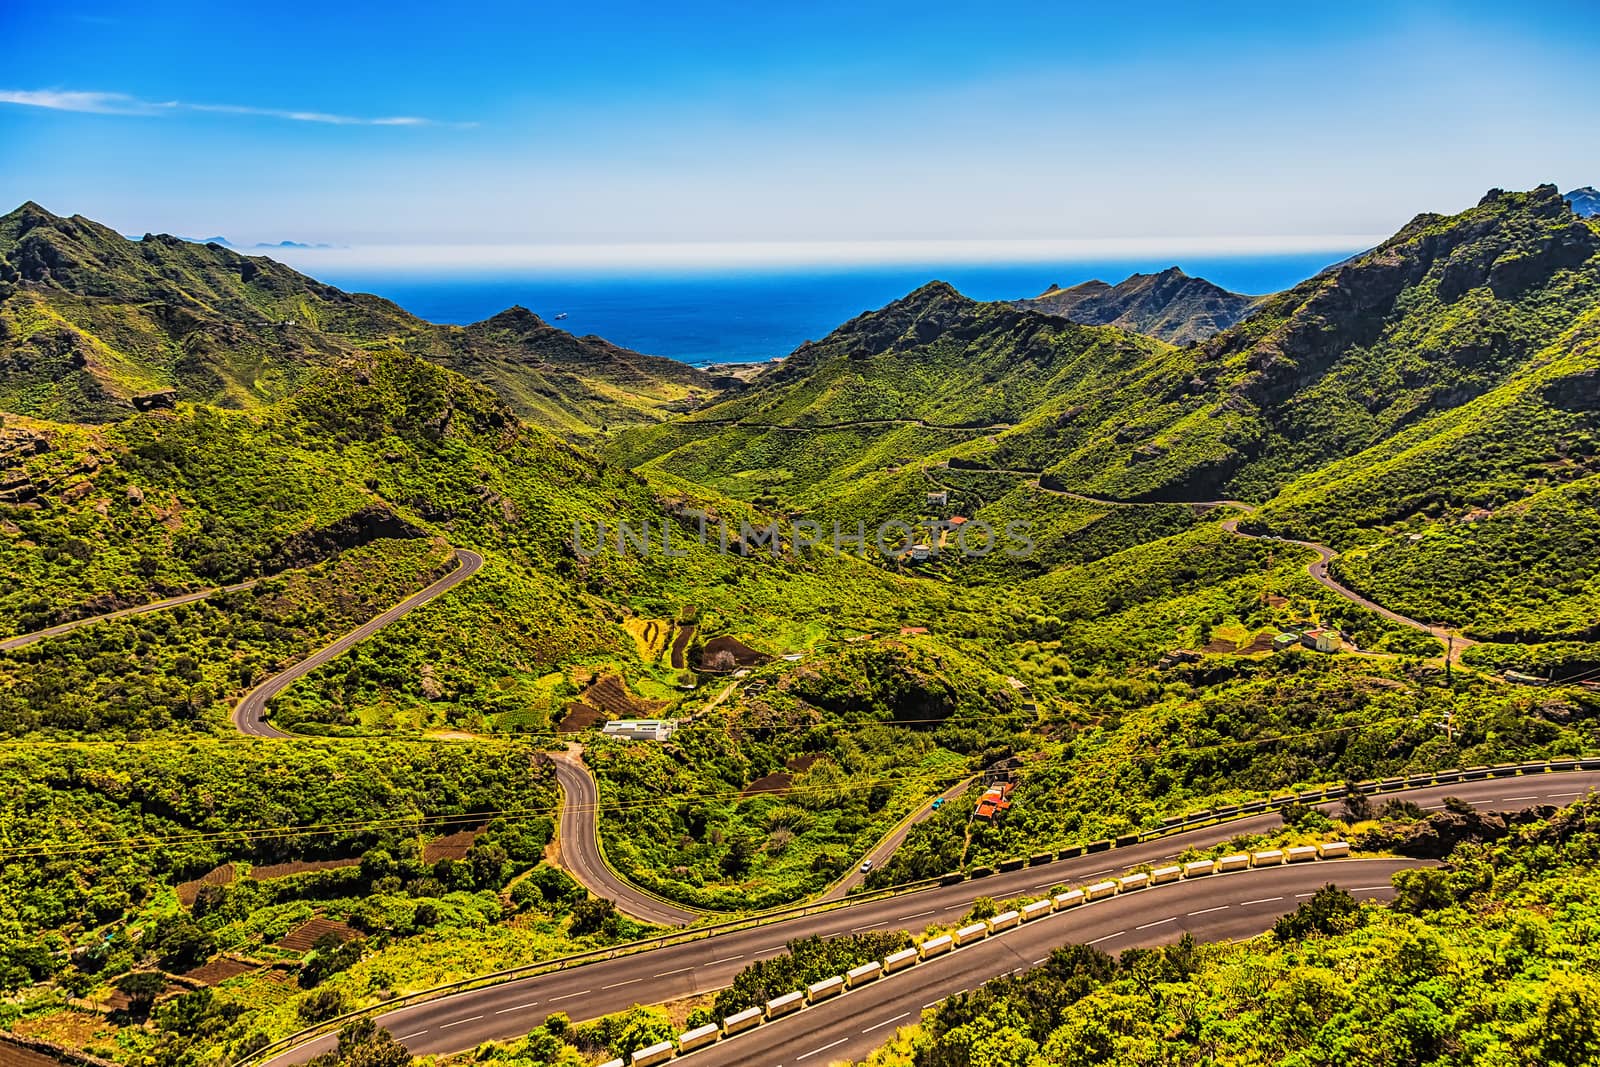 Green mountains or rocks valley with winding or serpantine road and sky with ocean on skyline landscape in Tenerife Canary island, Spain at summer